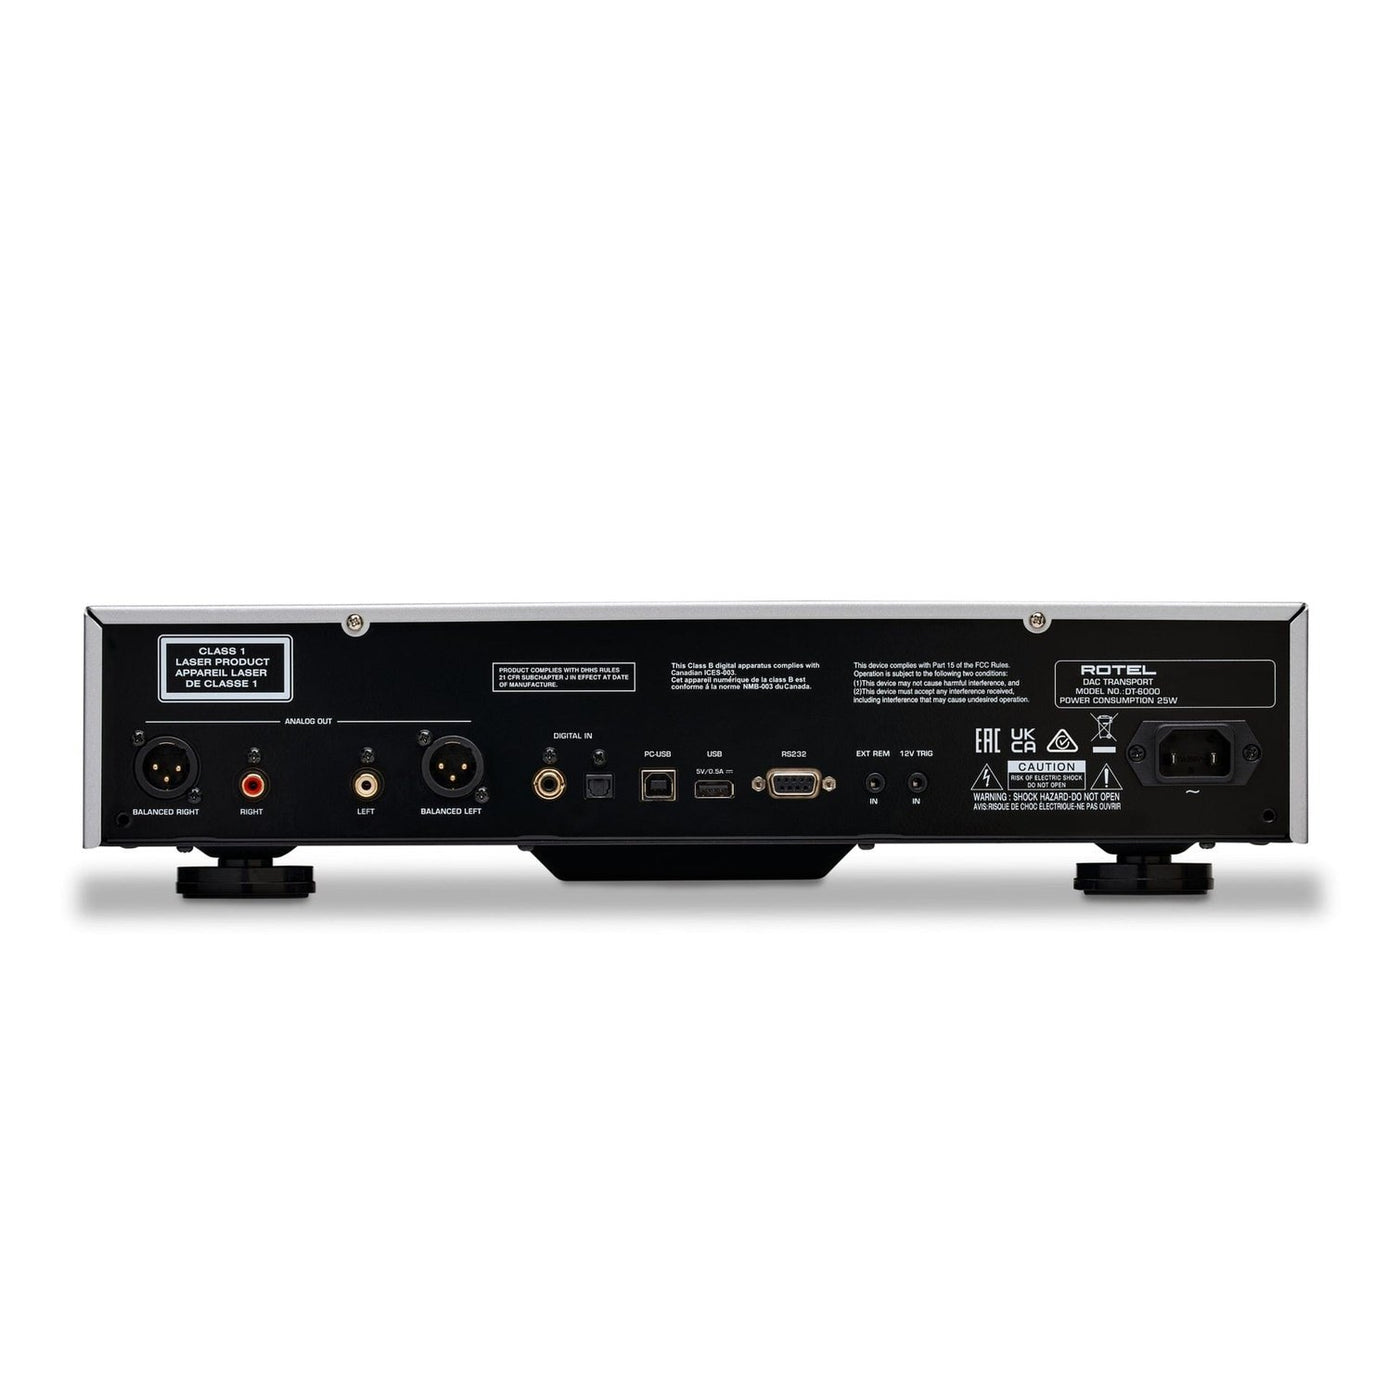 Rotel Rotel Diamond Series DT-6000 CD Player DAC - Back Order Approx 20th December CD Players